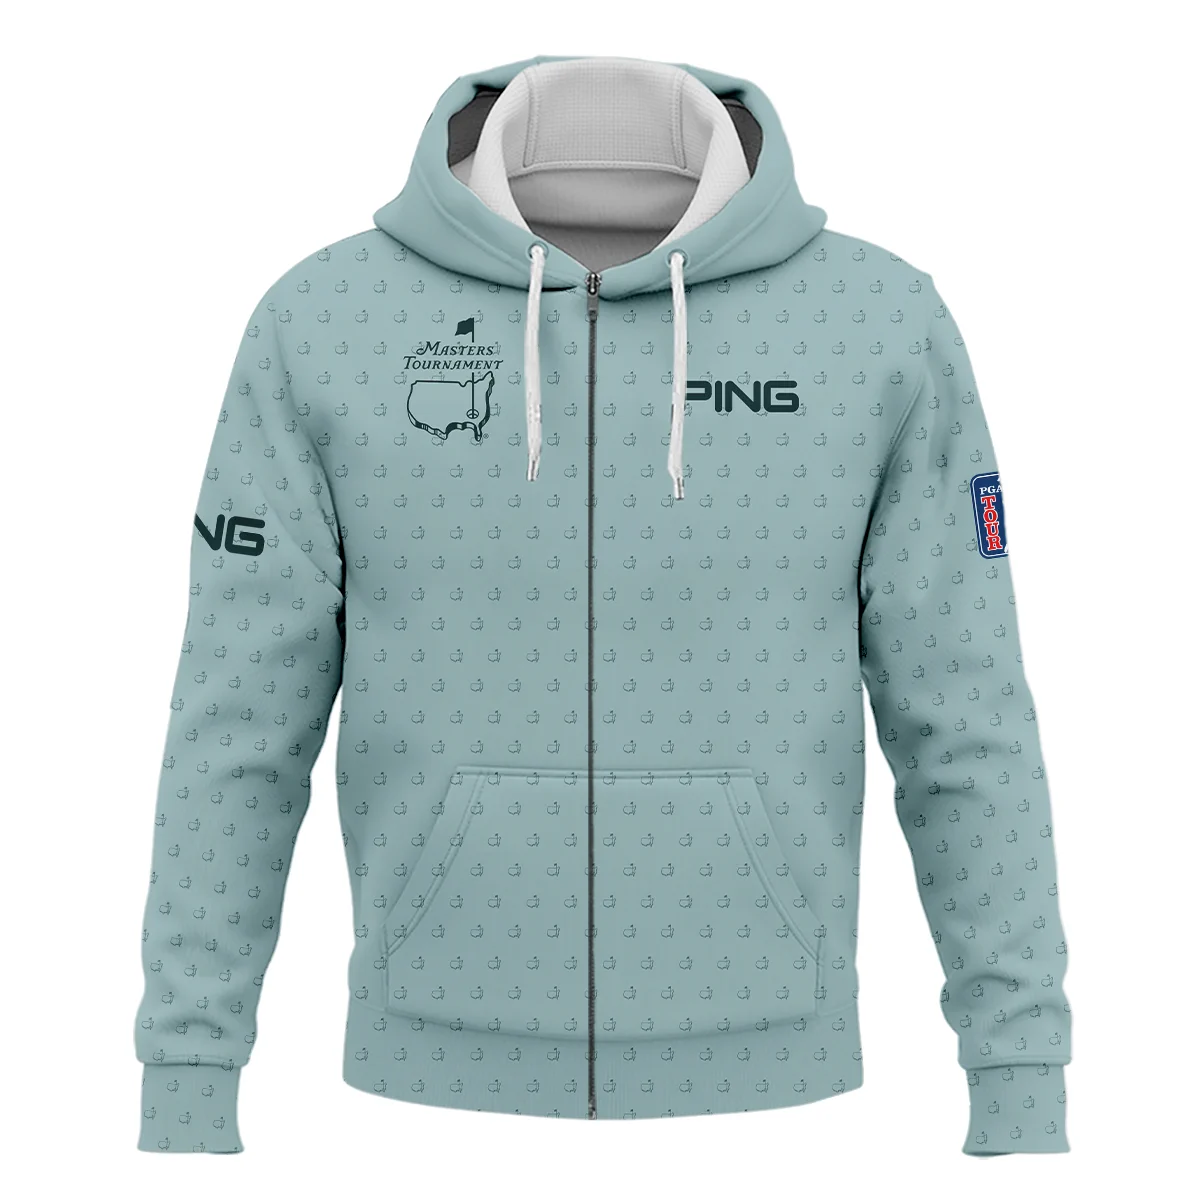 Golf Pattern Masters Tournament Ping Bomber Jacket Cyan Pattern All Over Print Bomber Jacket